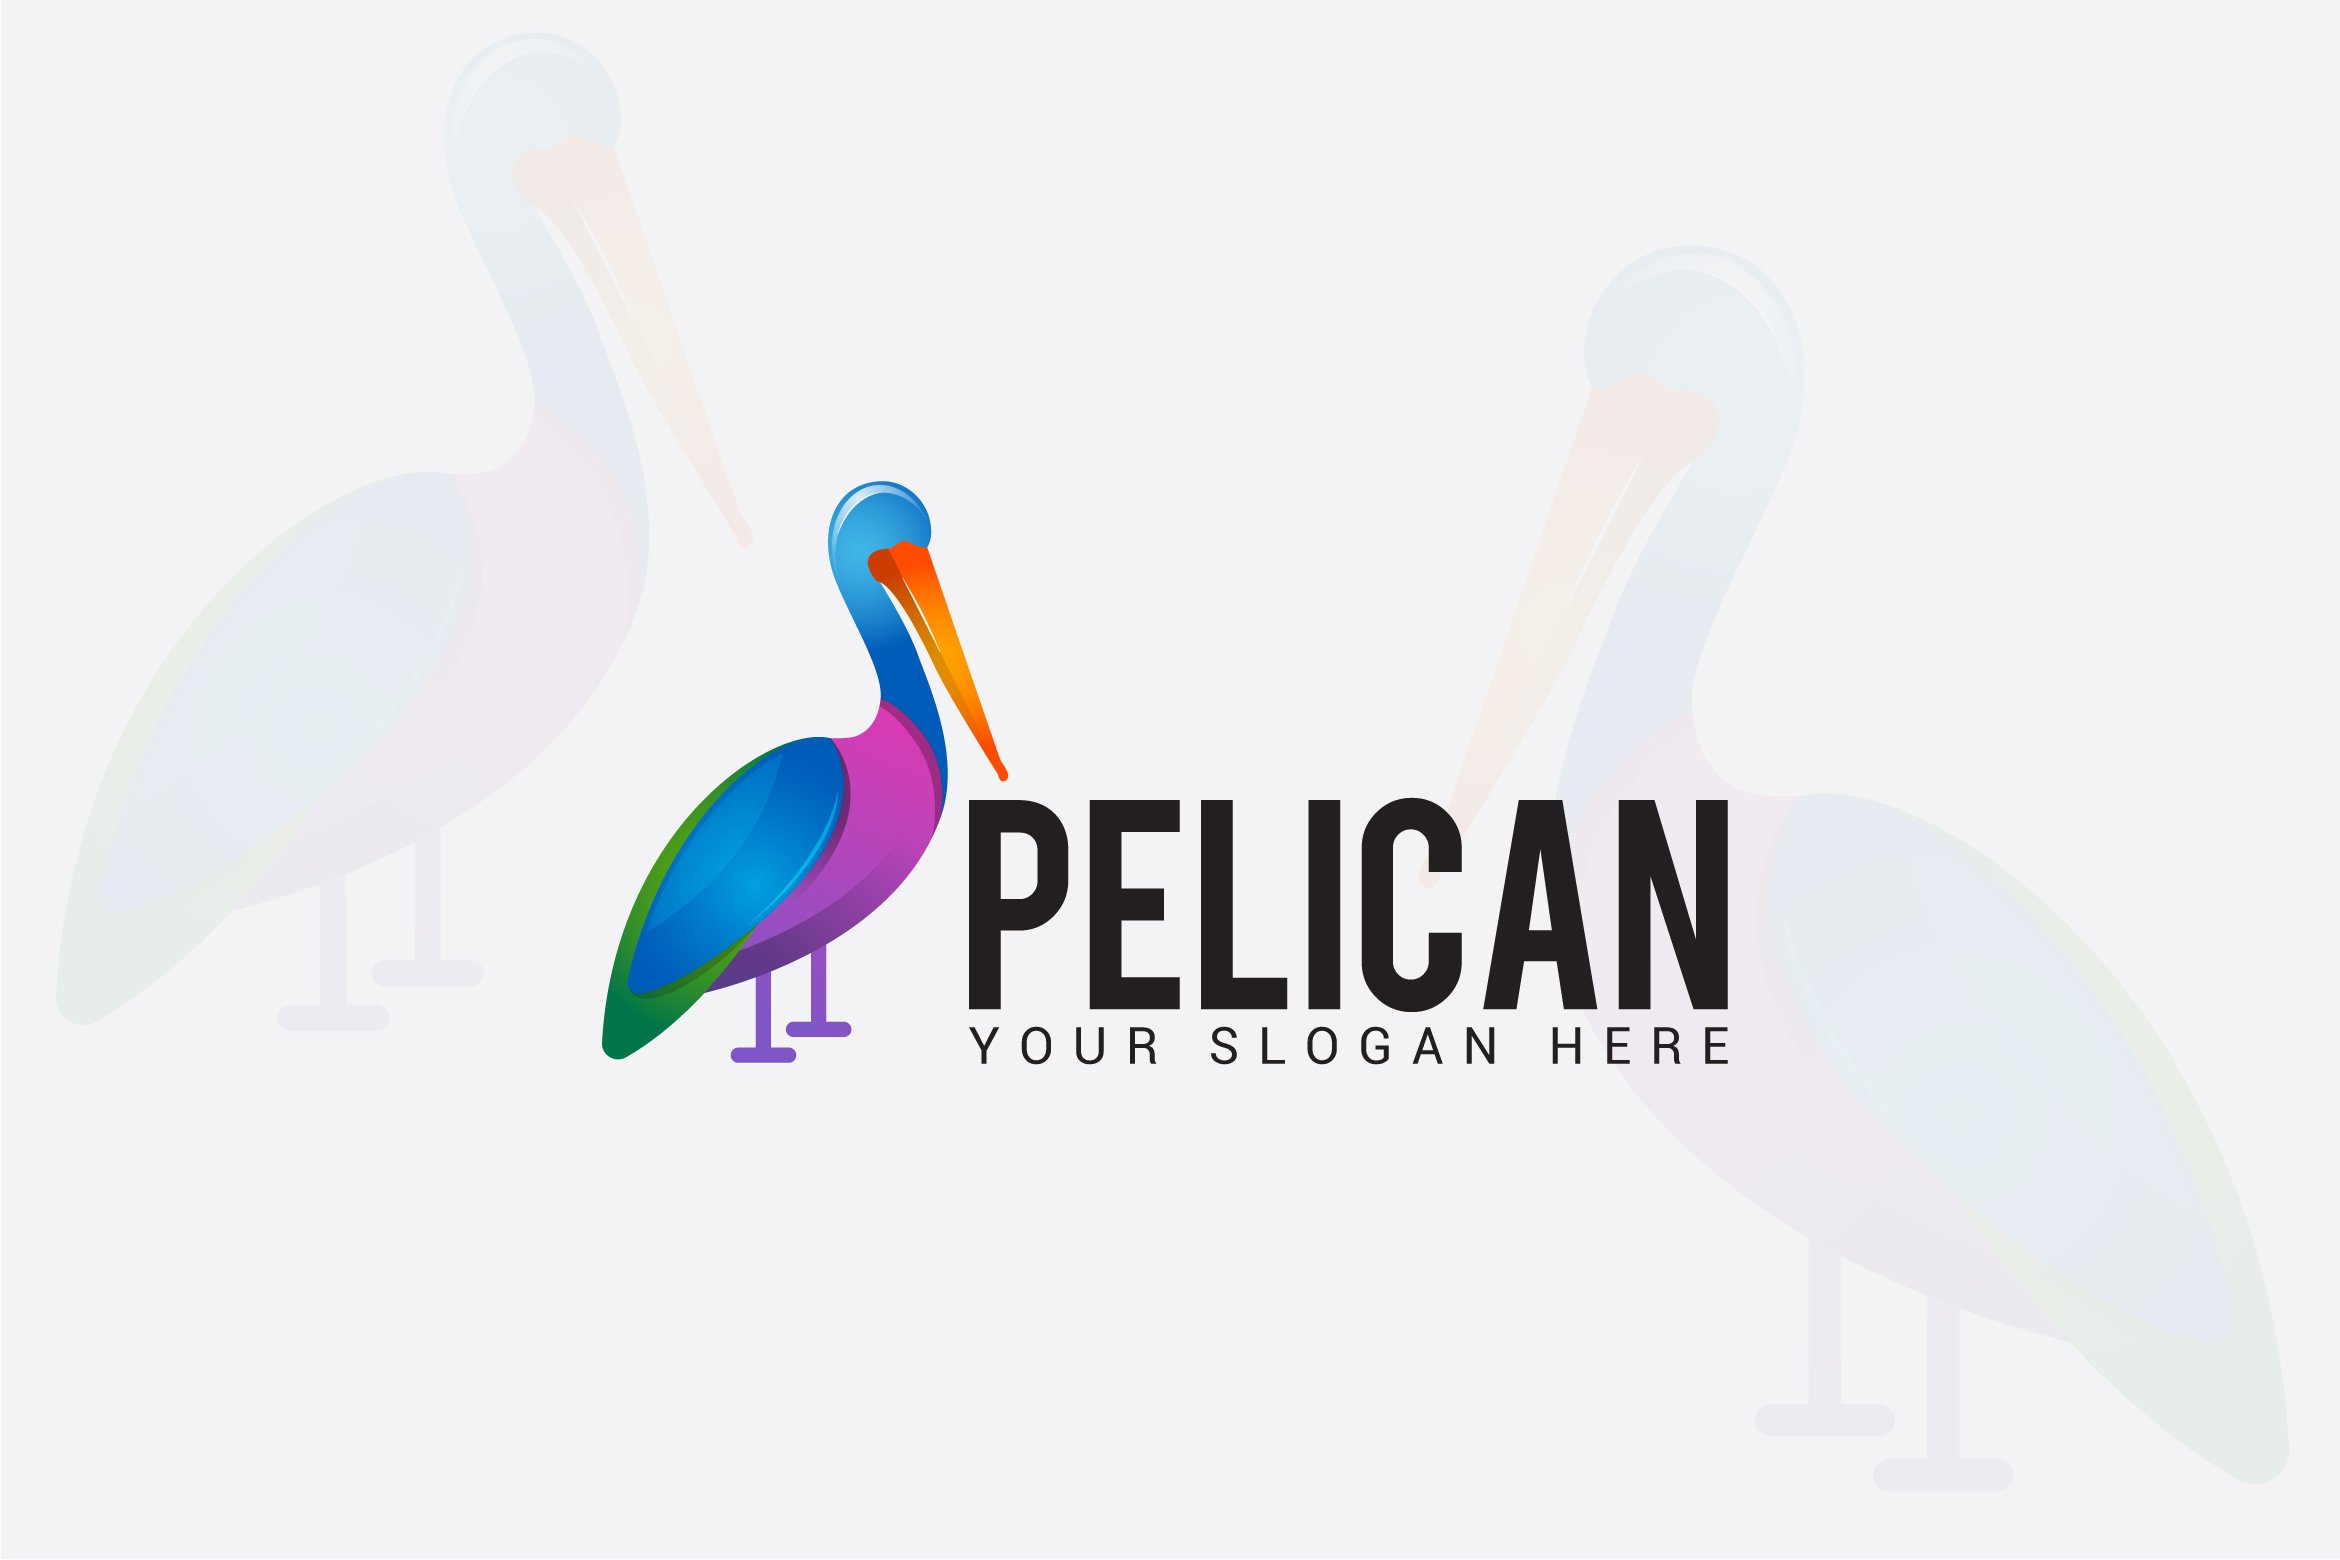 PELICAN cover image.